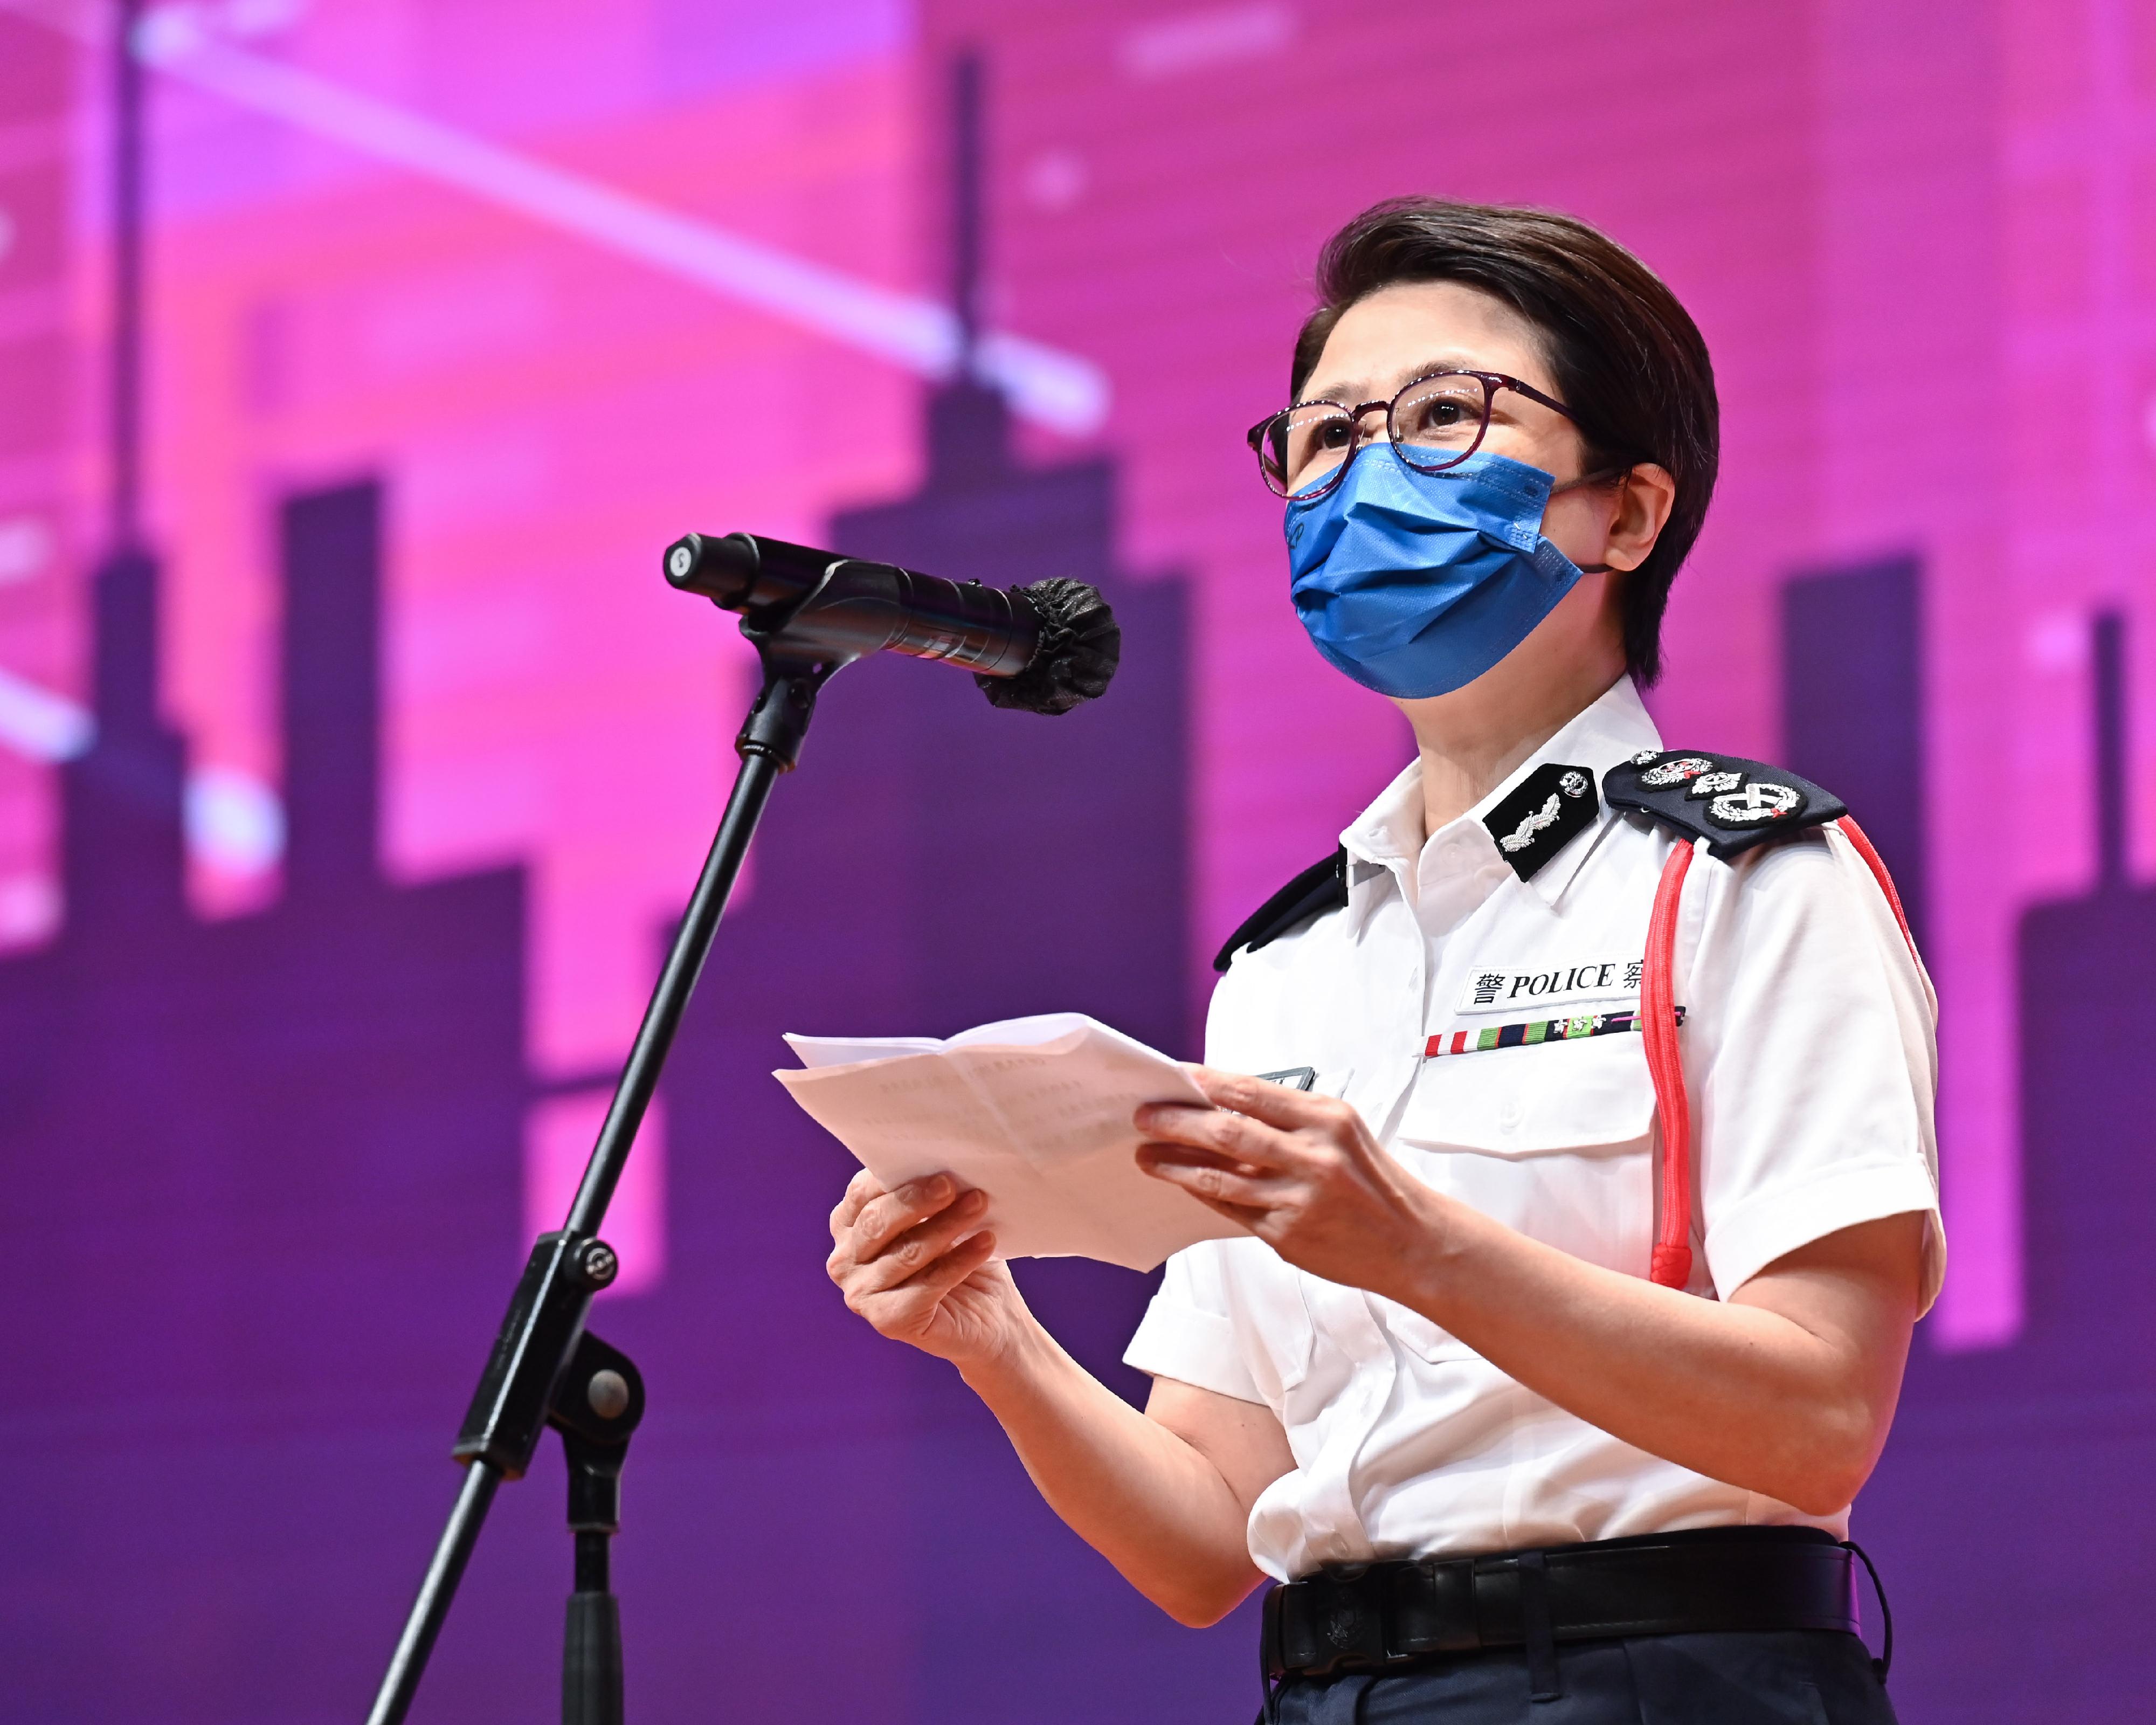 The Good Citizen Award Presentation Ceremony 2021 (Phase II) was held today (August 28). Picture shows the Acting Commissioner of Police, Ms Lau Chi-wai, addressing at the ceremony.
